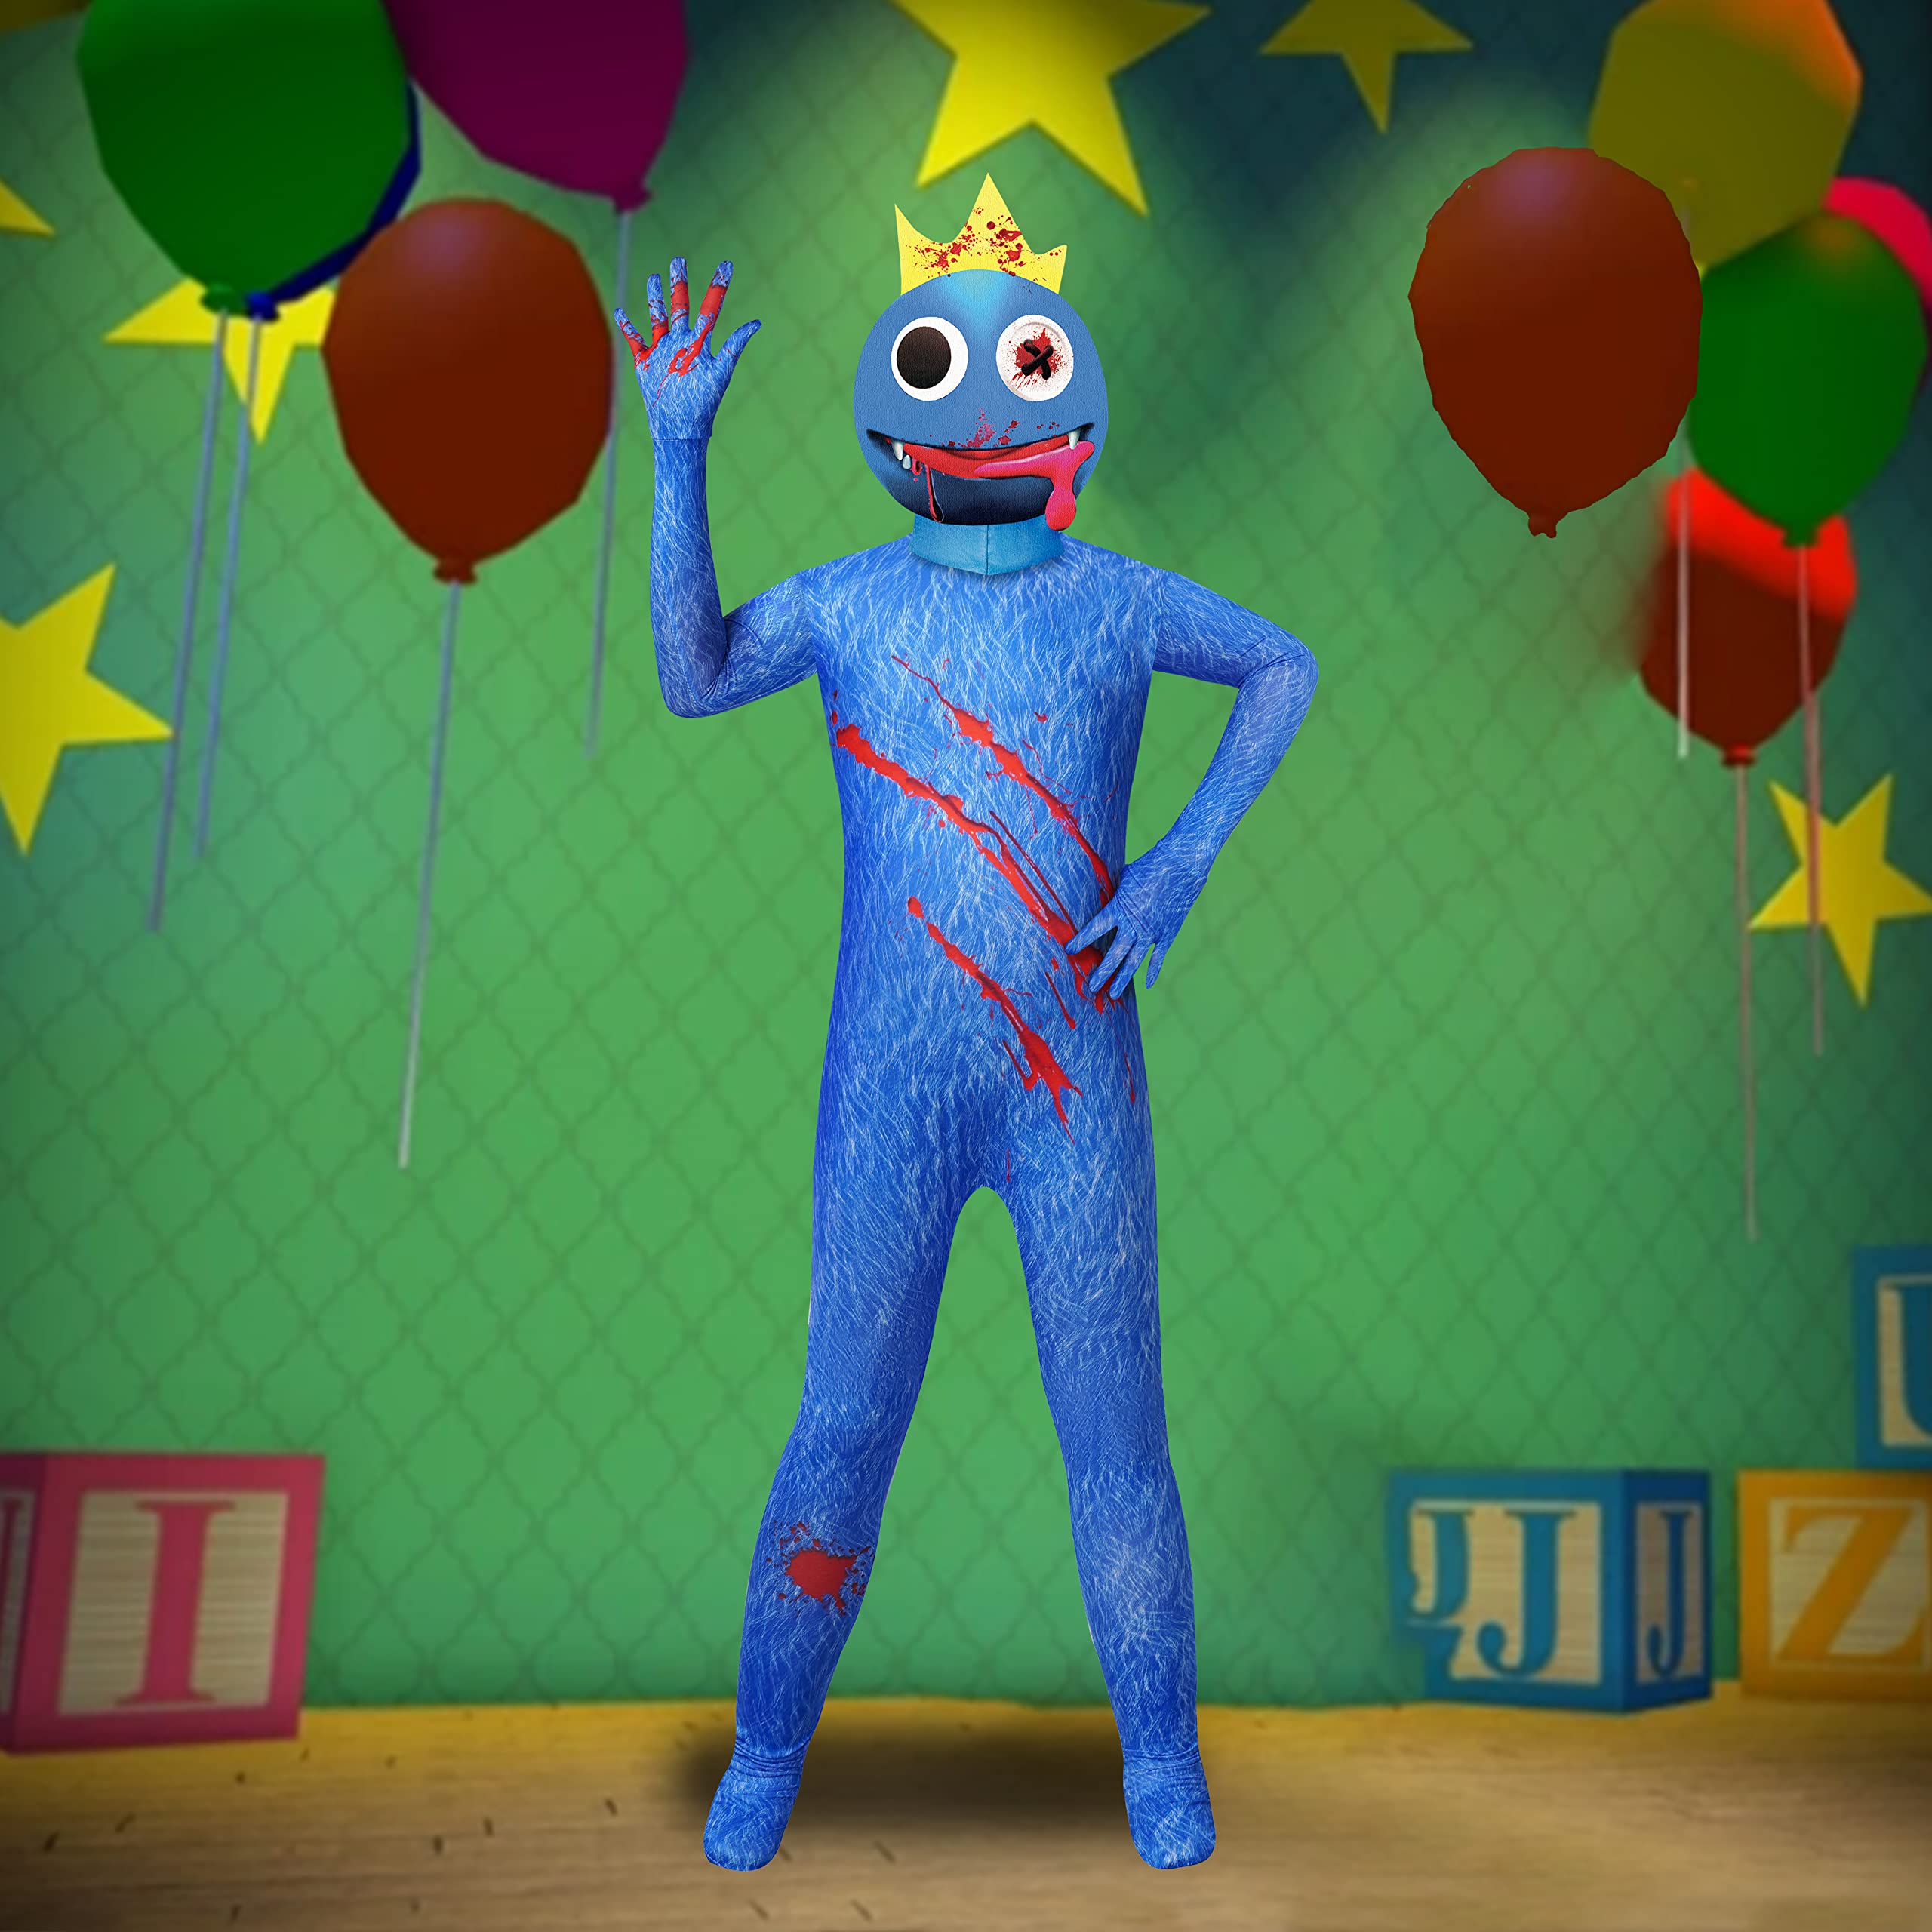 One-piece Rainbow Friends Costume For Kids Adults Blue Monster